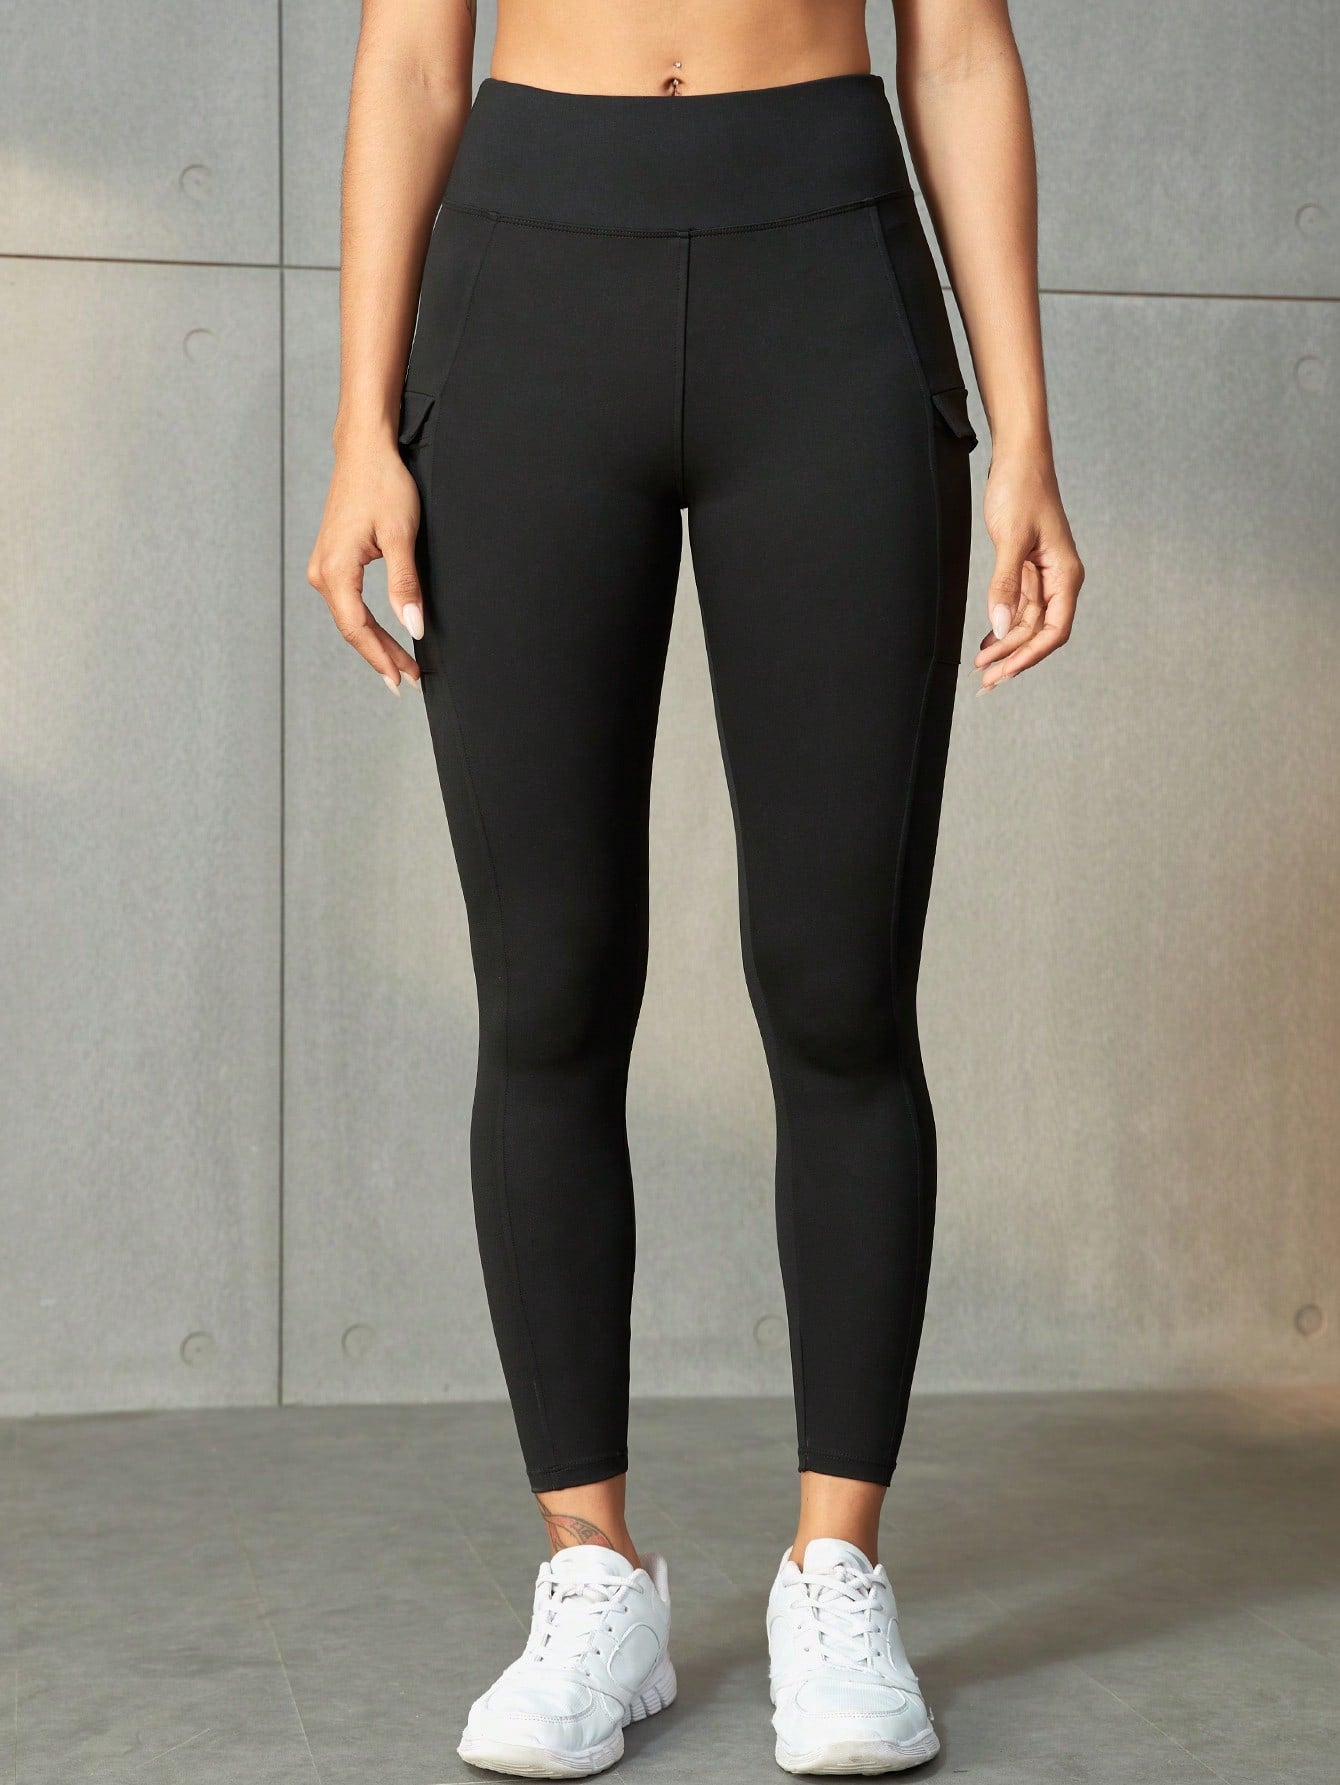 Stylish Solid Stretch Leggings with Phone Pocket: Game-Changing Gear for Running, Yoga, and Sports